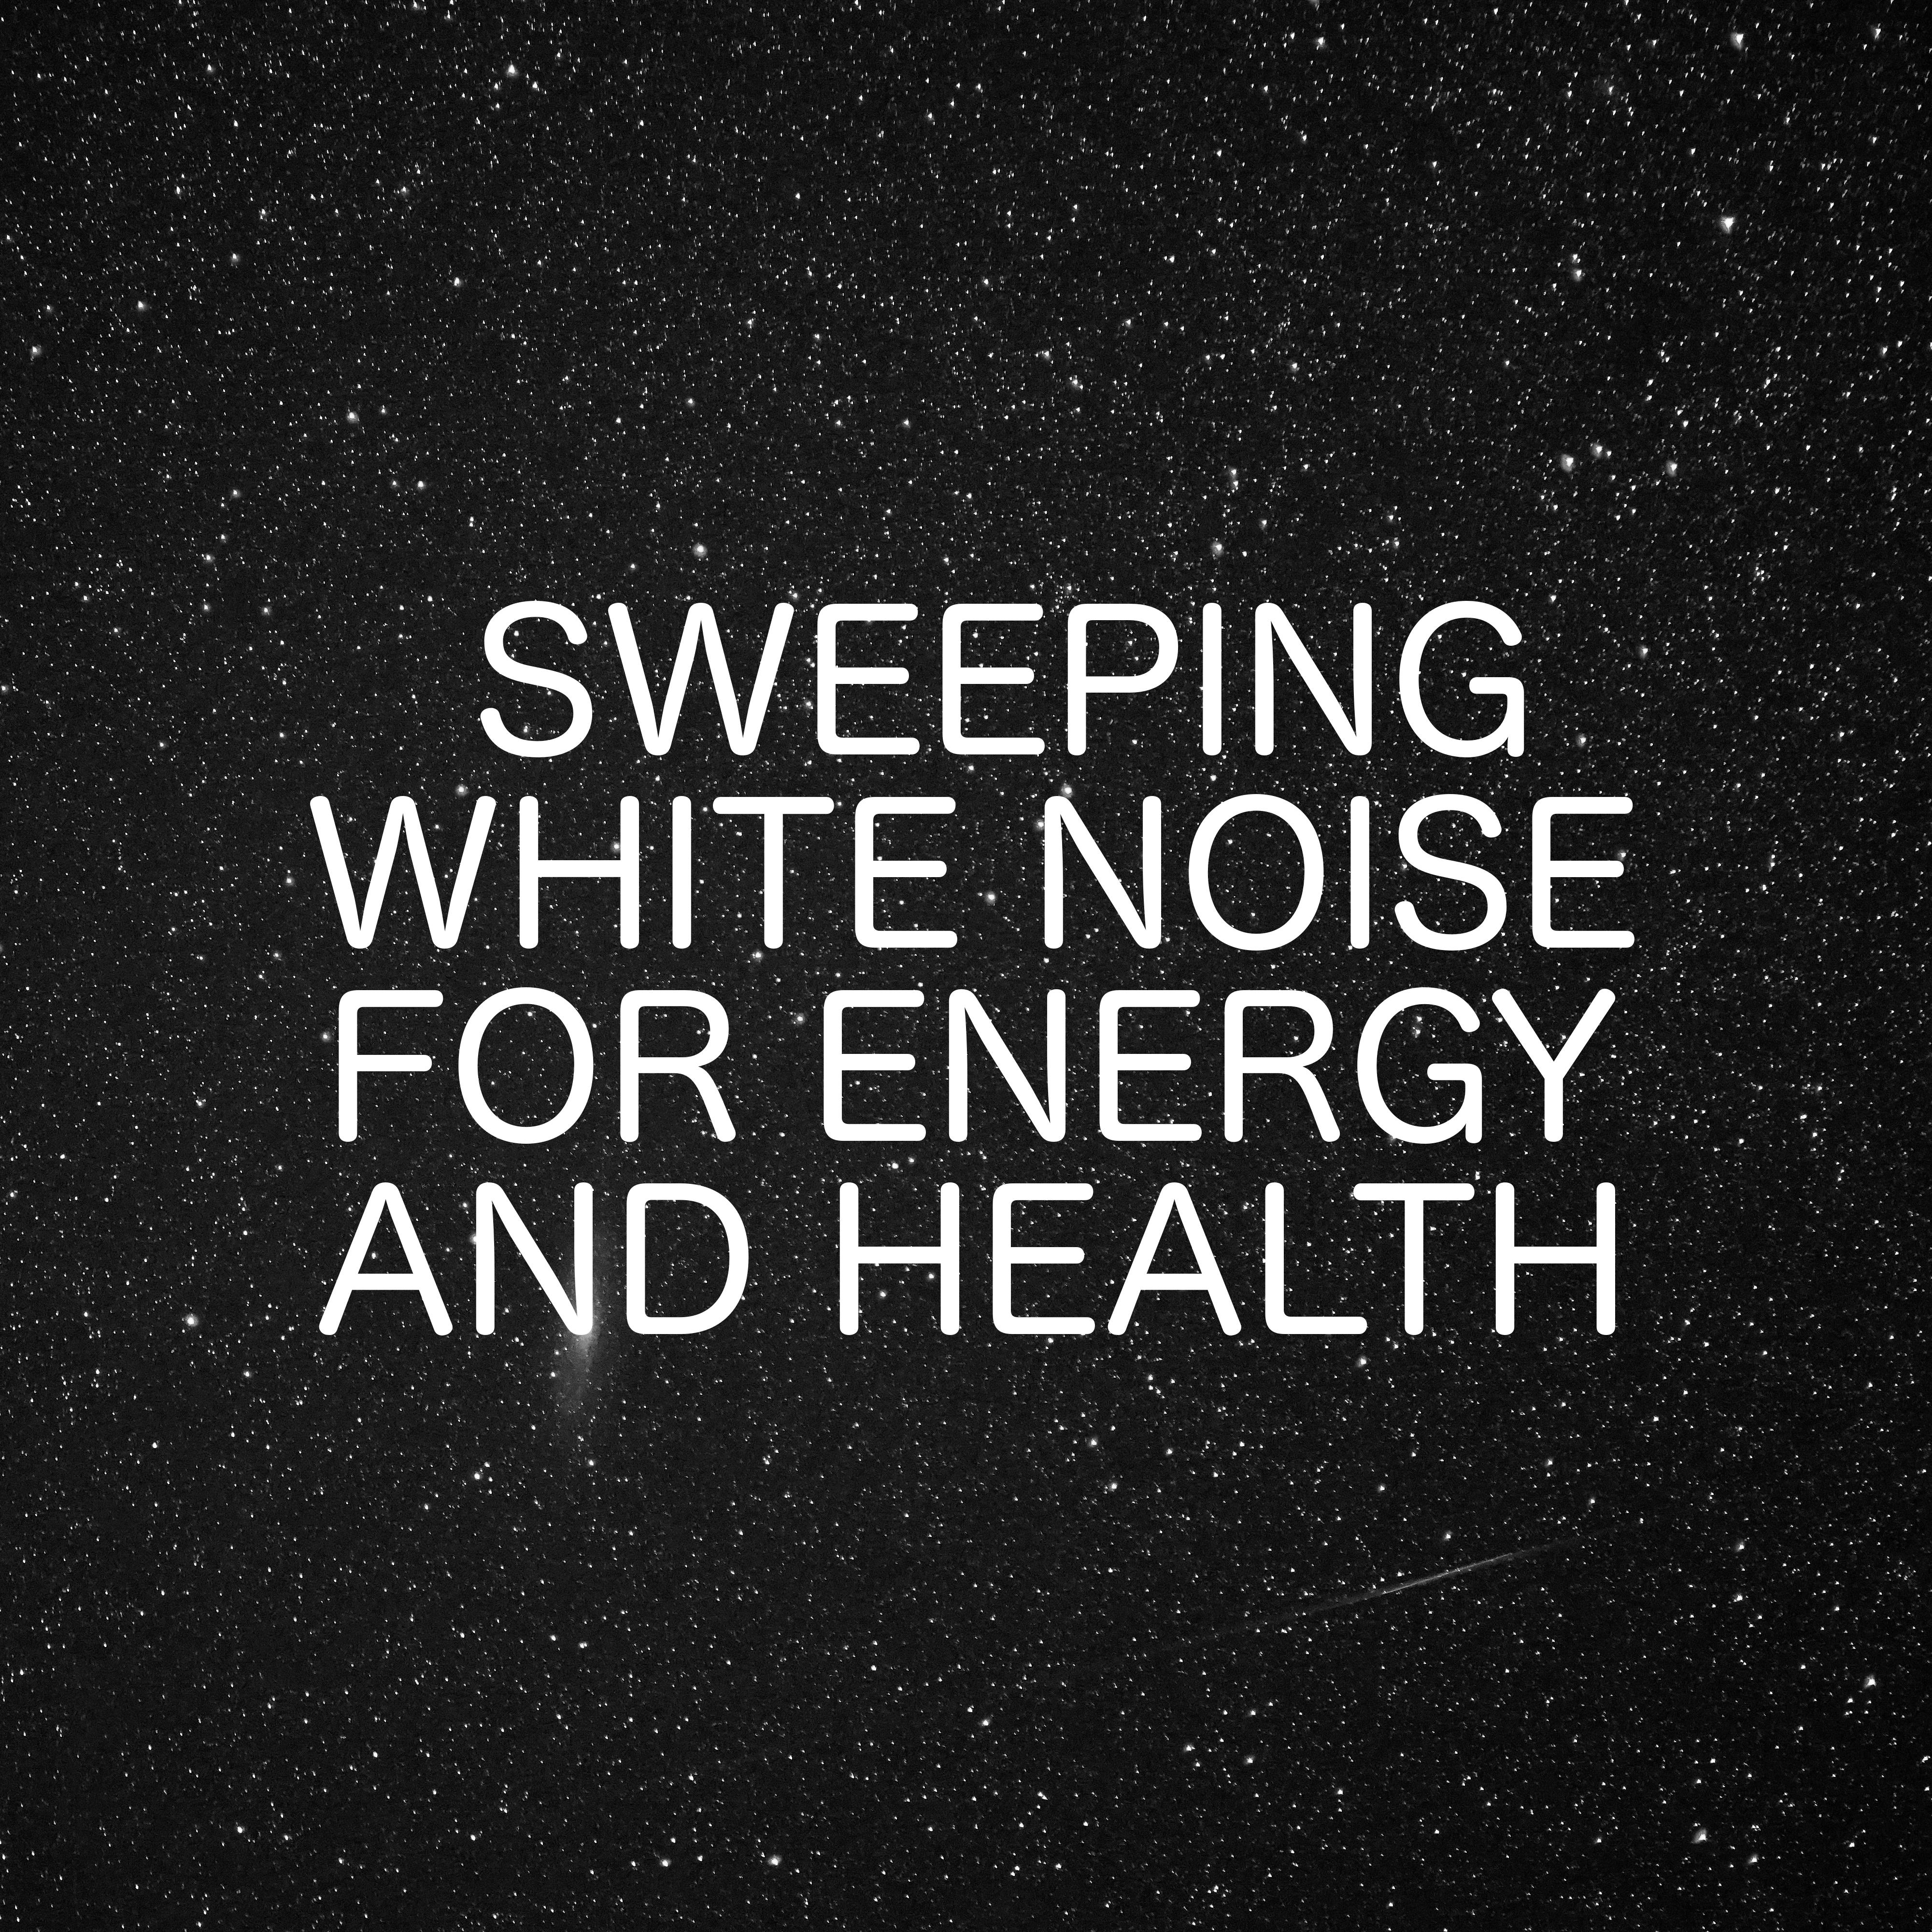 Sweeping White Noise